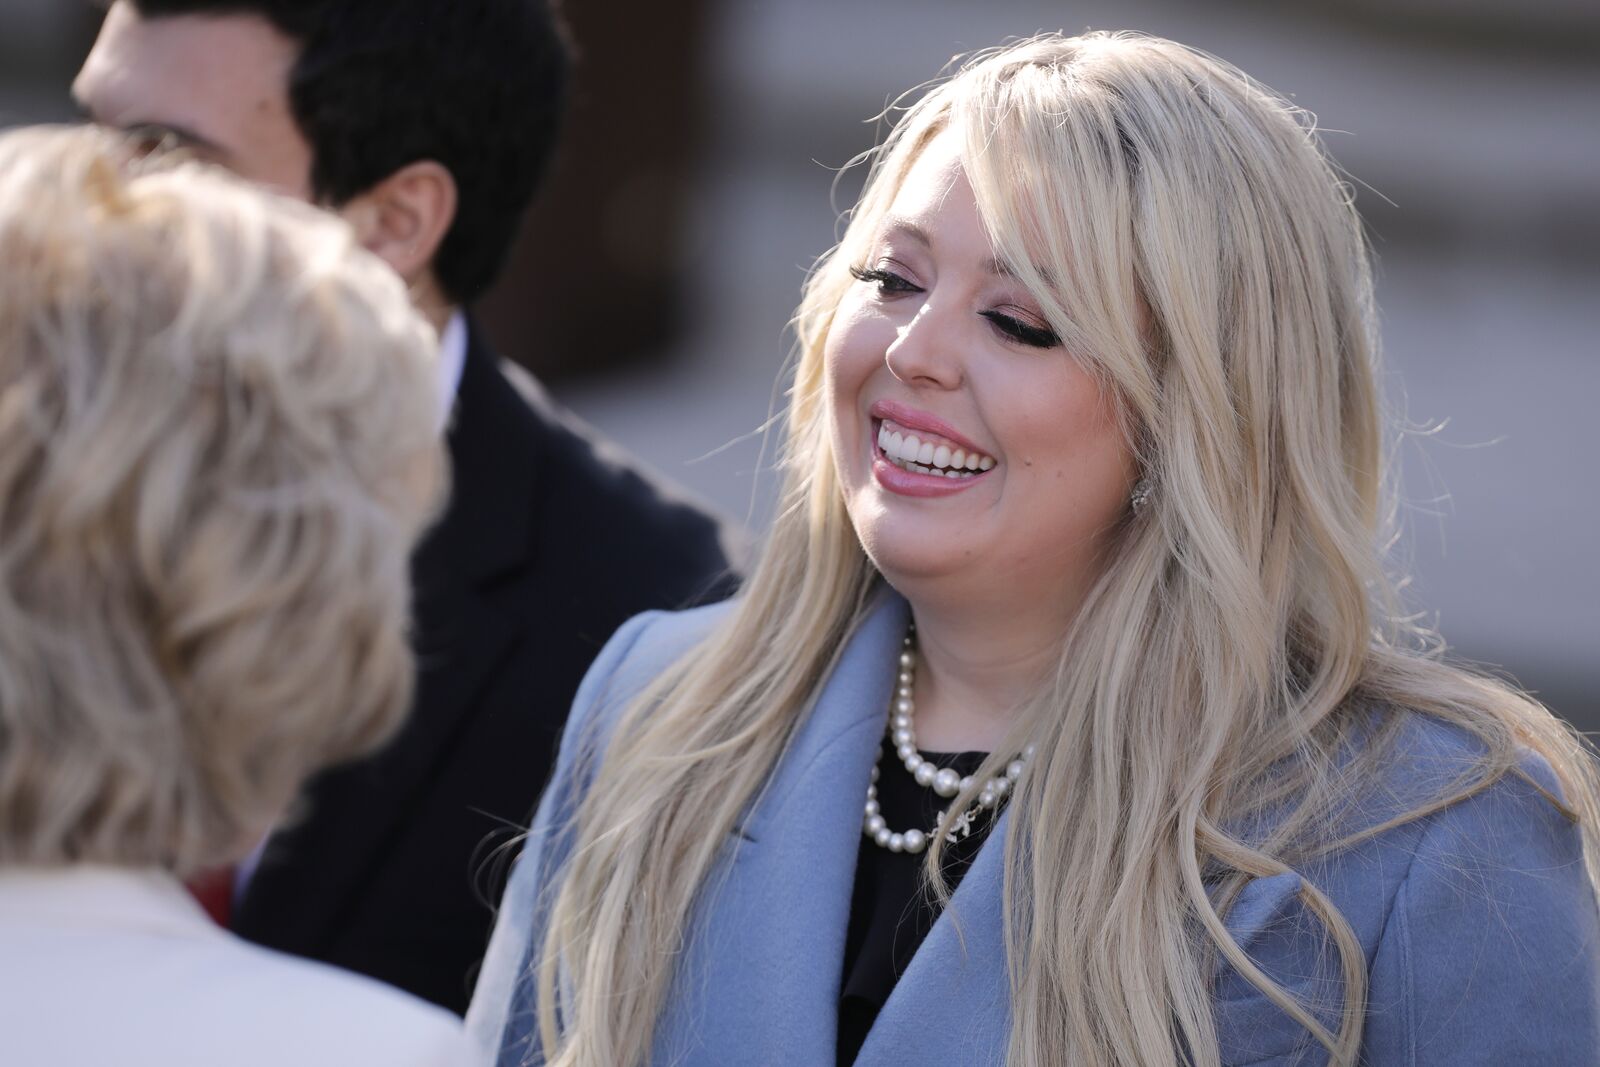 Tiffany Trump at the National Thanksgiving Turkey pardoning event in the Rose Garden of the White House in  2019 | Source: Getty Images